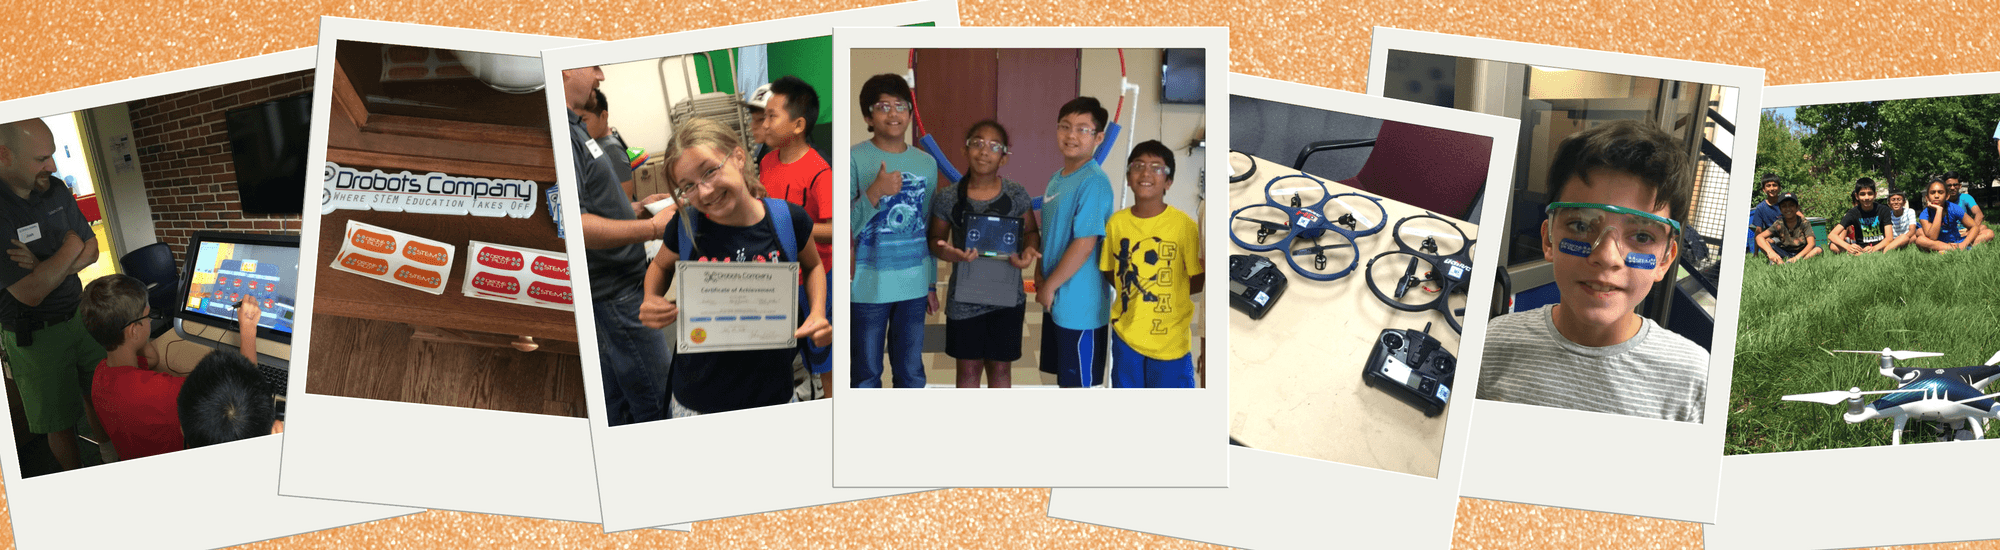 Drone And Aerial Robotics Stem Summer Camp For Kids Pre Teen Teen - roblox coding summer camp